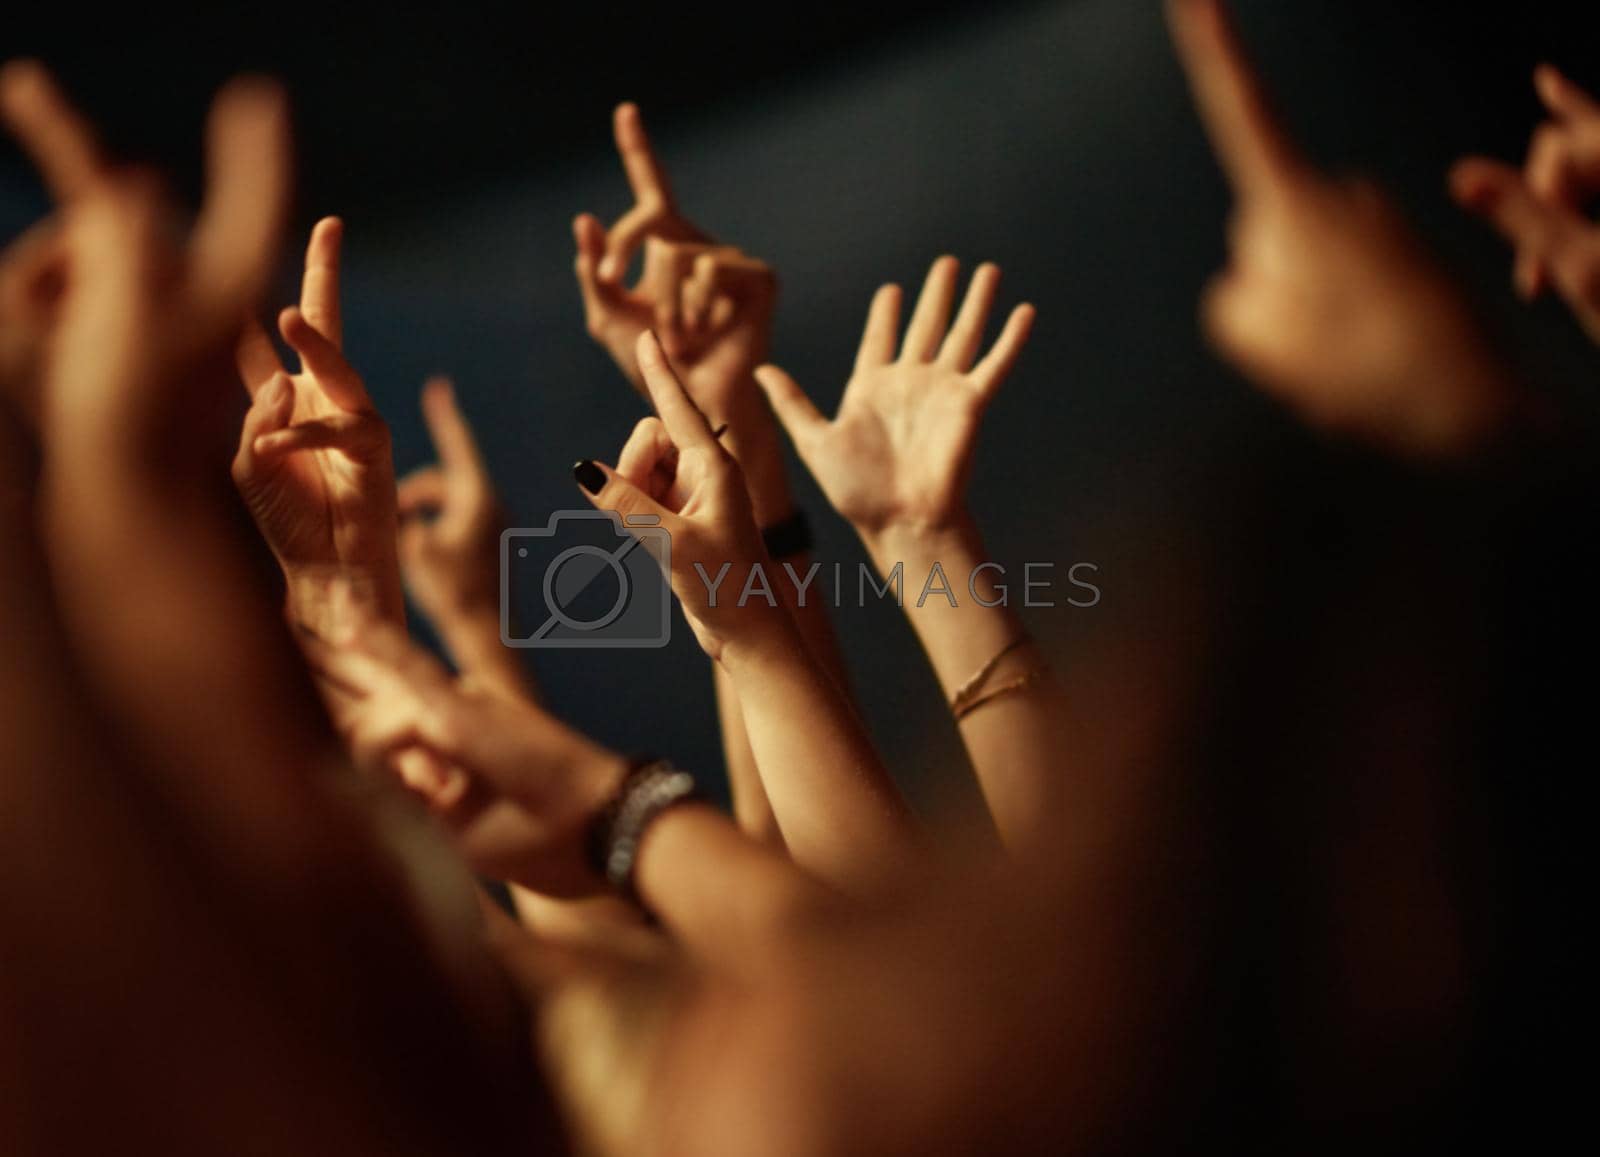 Royalty free image of Feeling the music. A crowd of people raising their arms to the music. by YuriArcurs